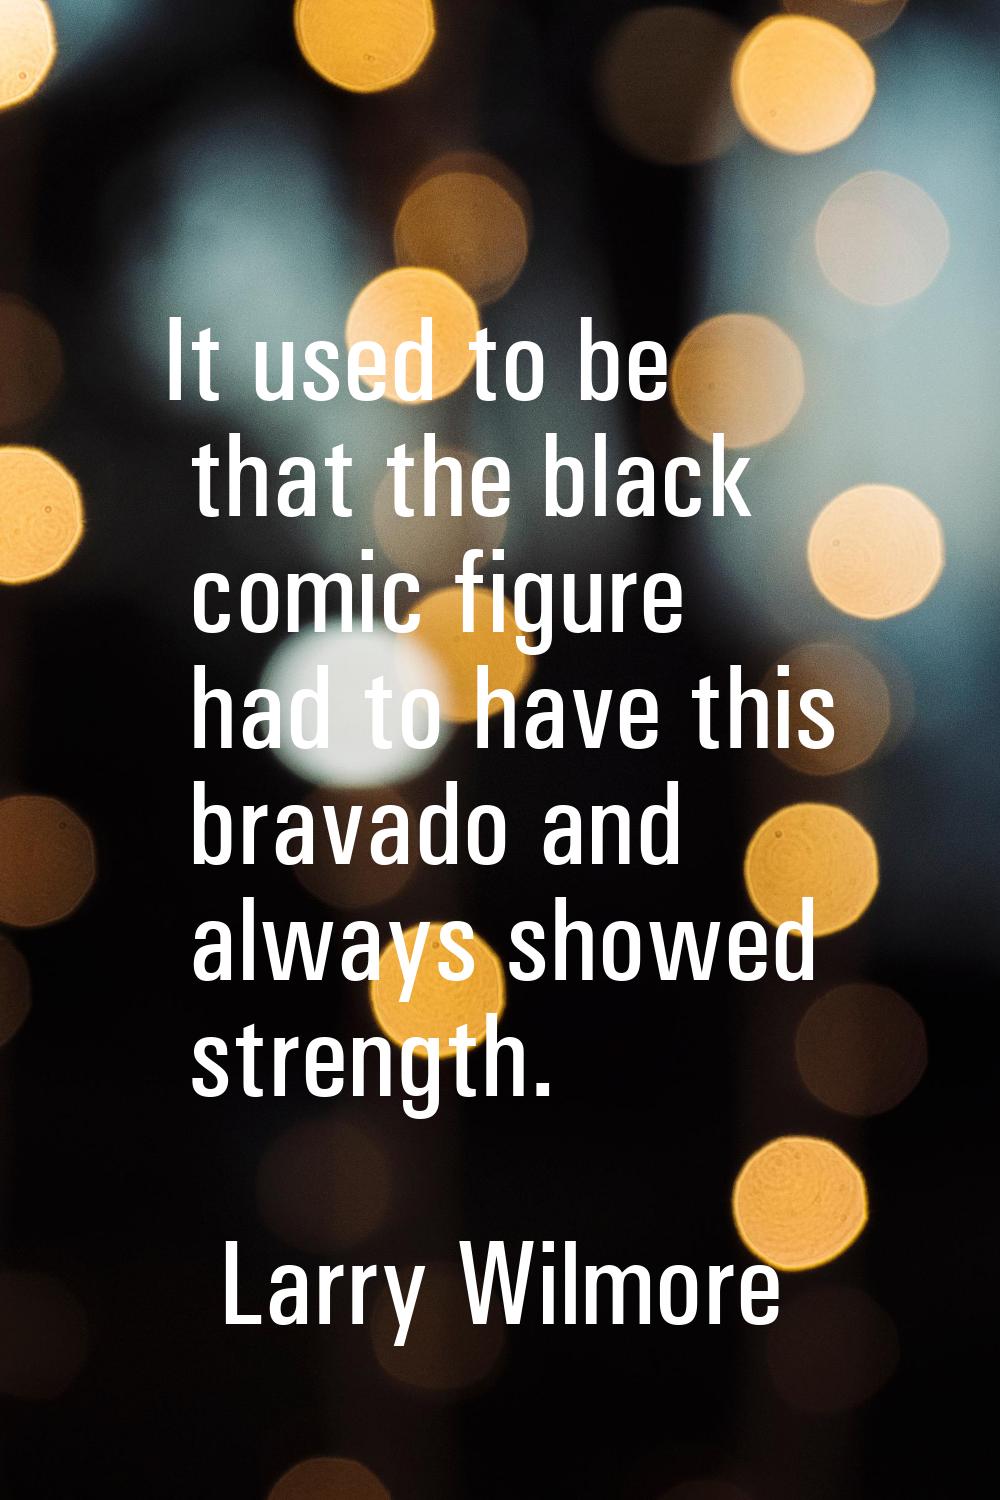 It used to be that the black comic figure had to have this bravado and always showed strength.